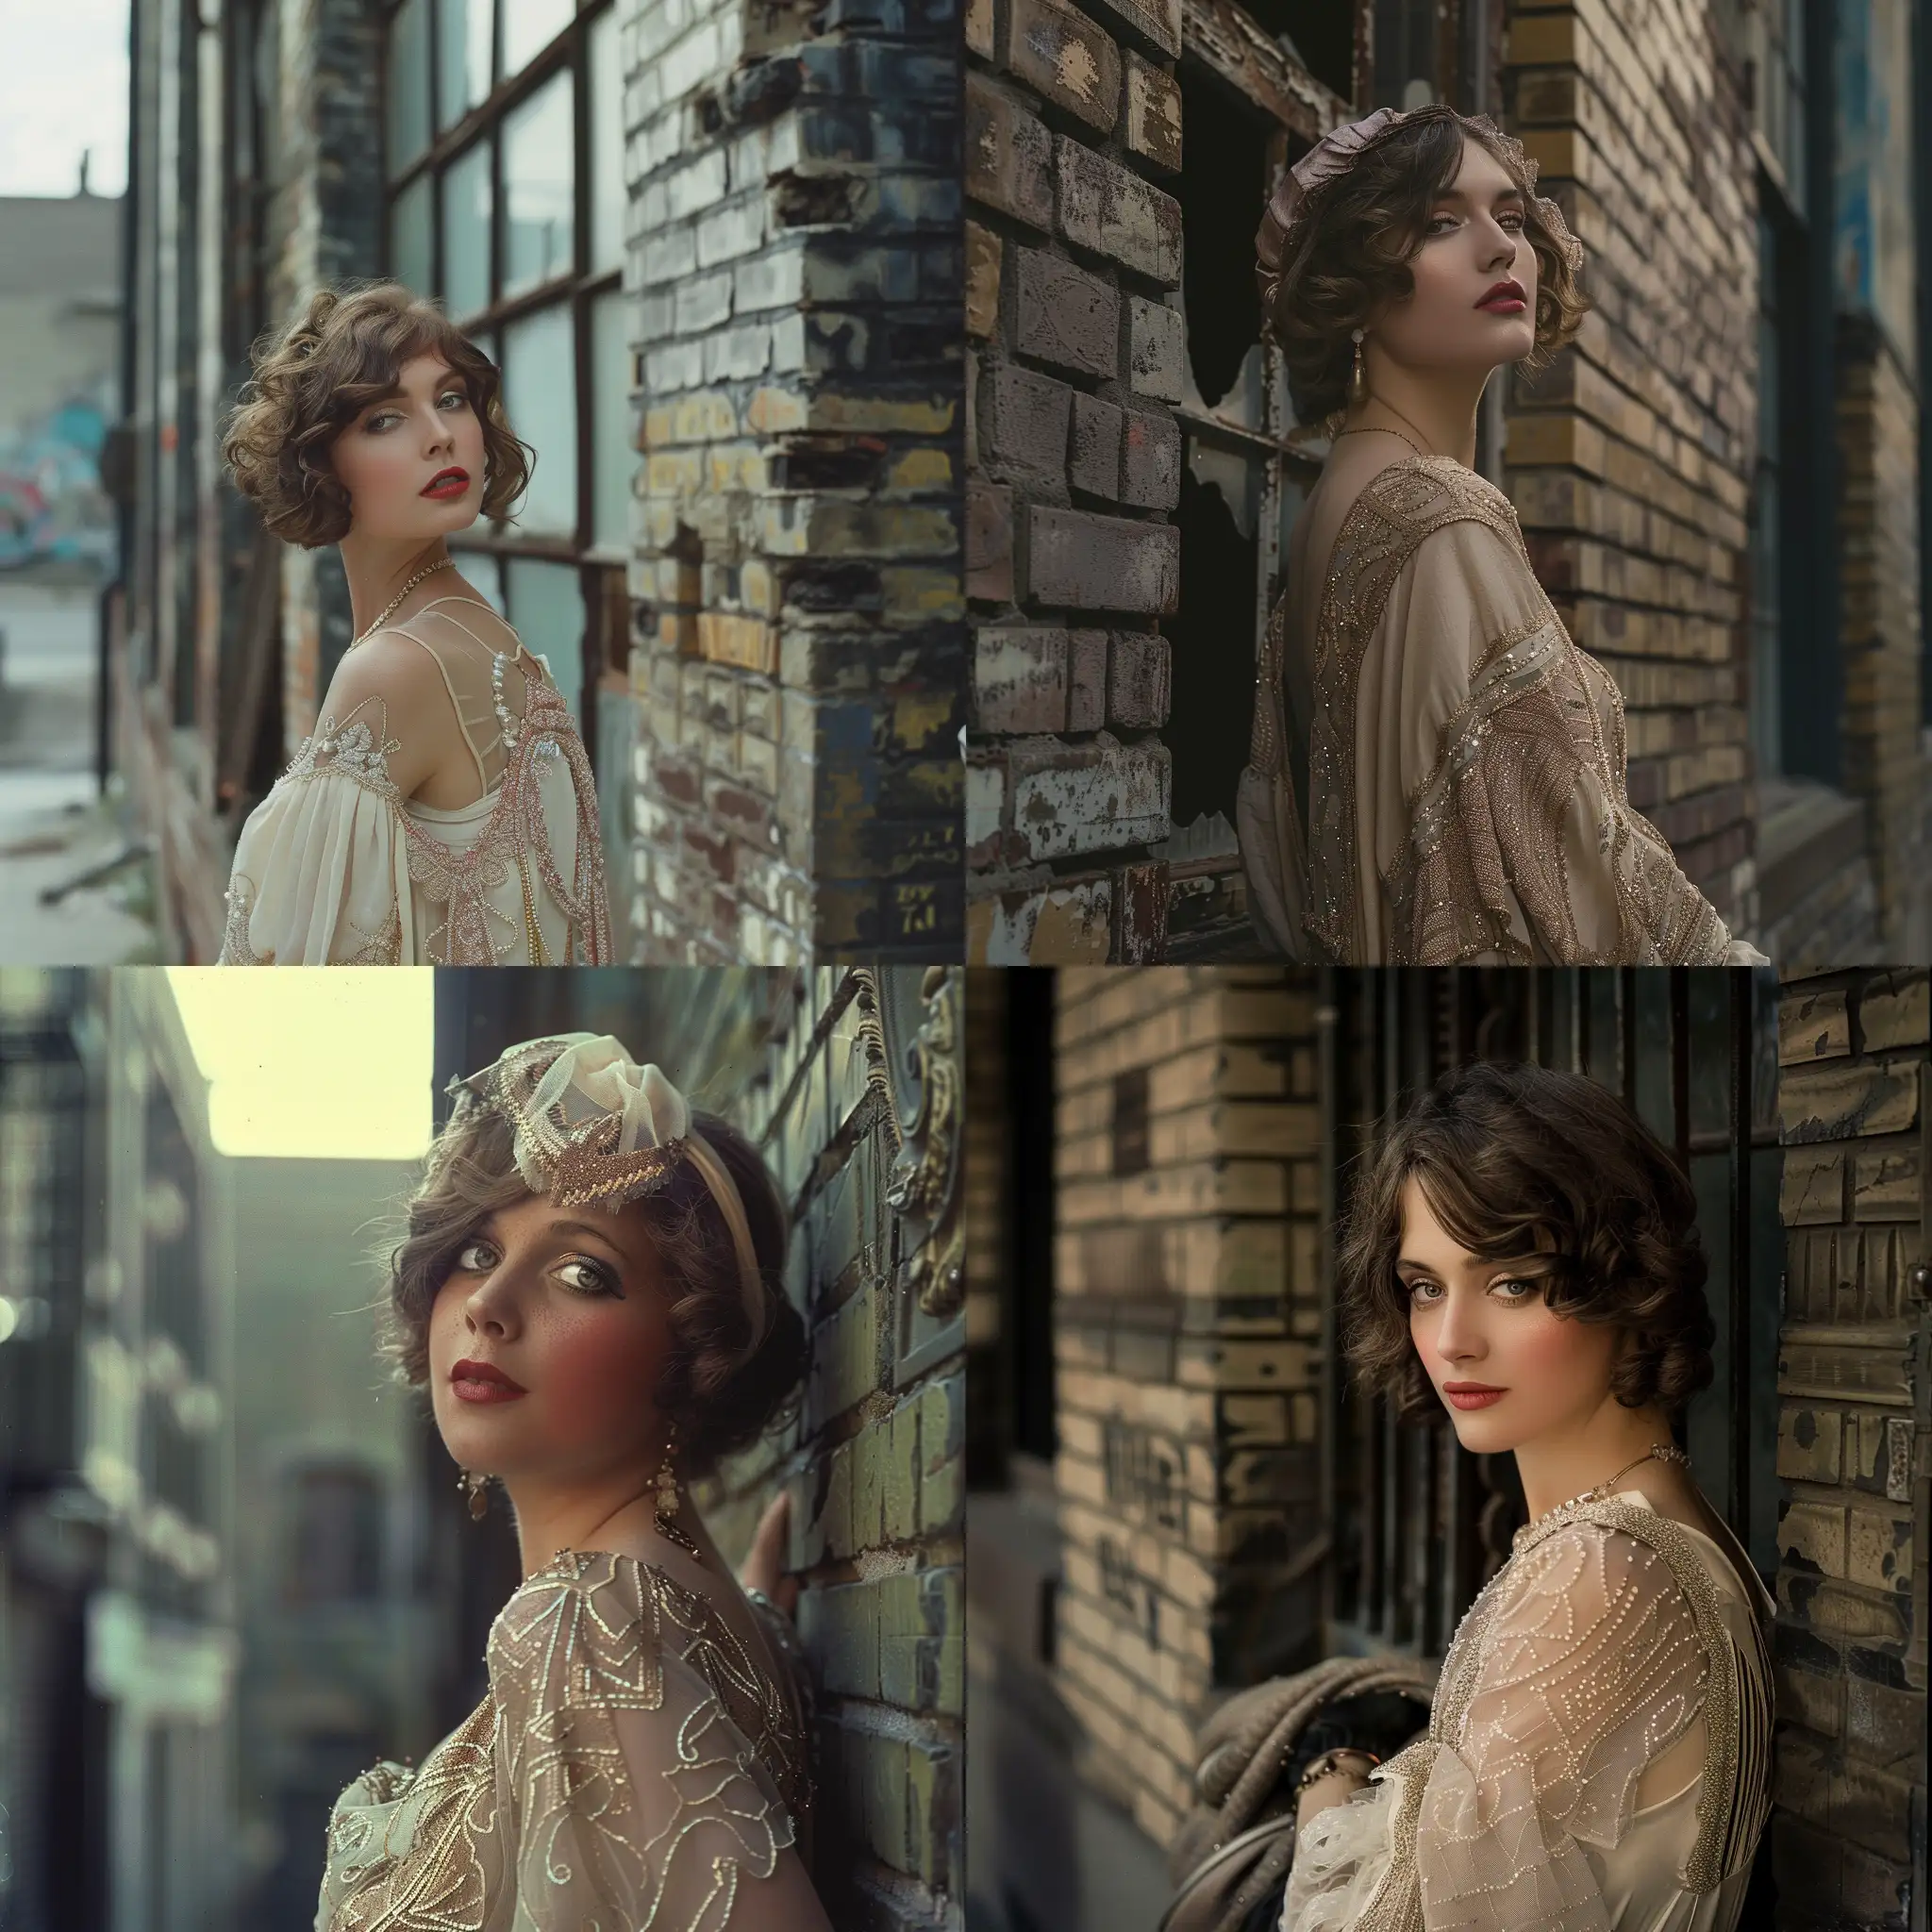 Old color photography of a beautiful woman dressed in 1920s fashion, posing against an old brick building. 